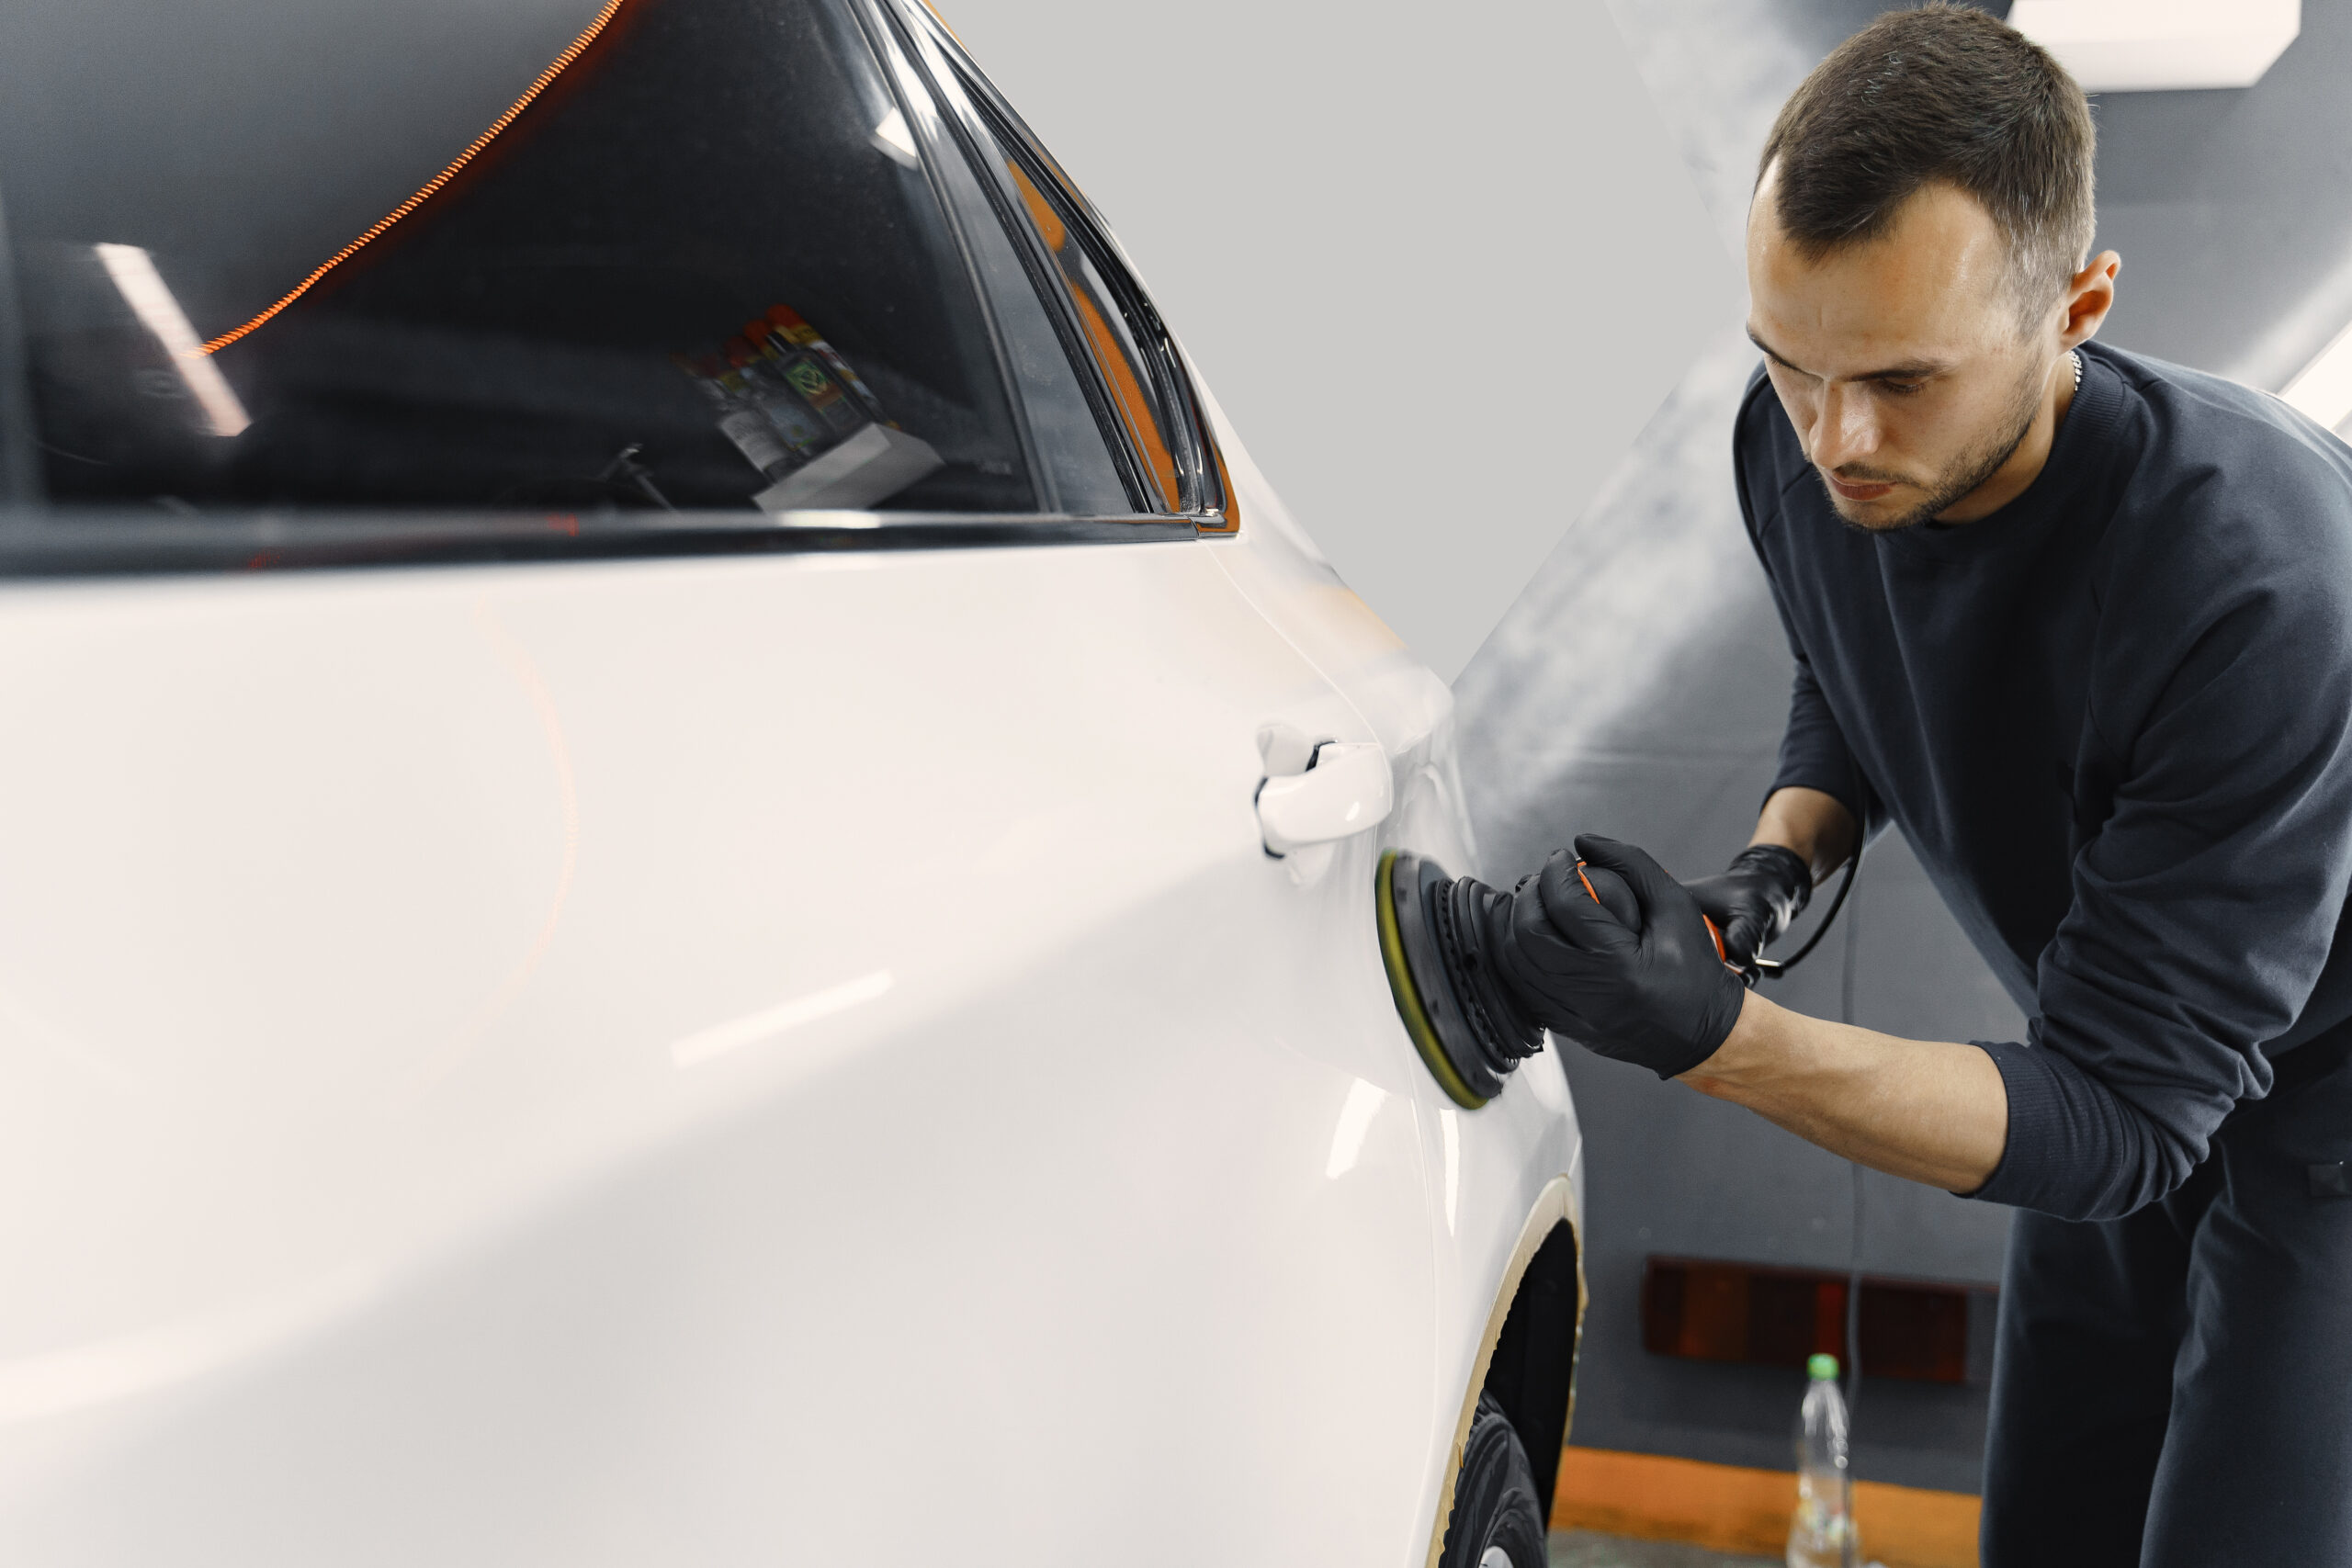 Revitalise Your Car’s Appearance With Expert Scratch Repair Services